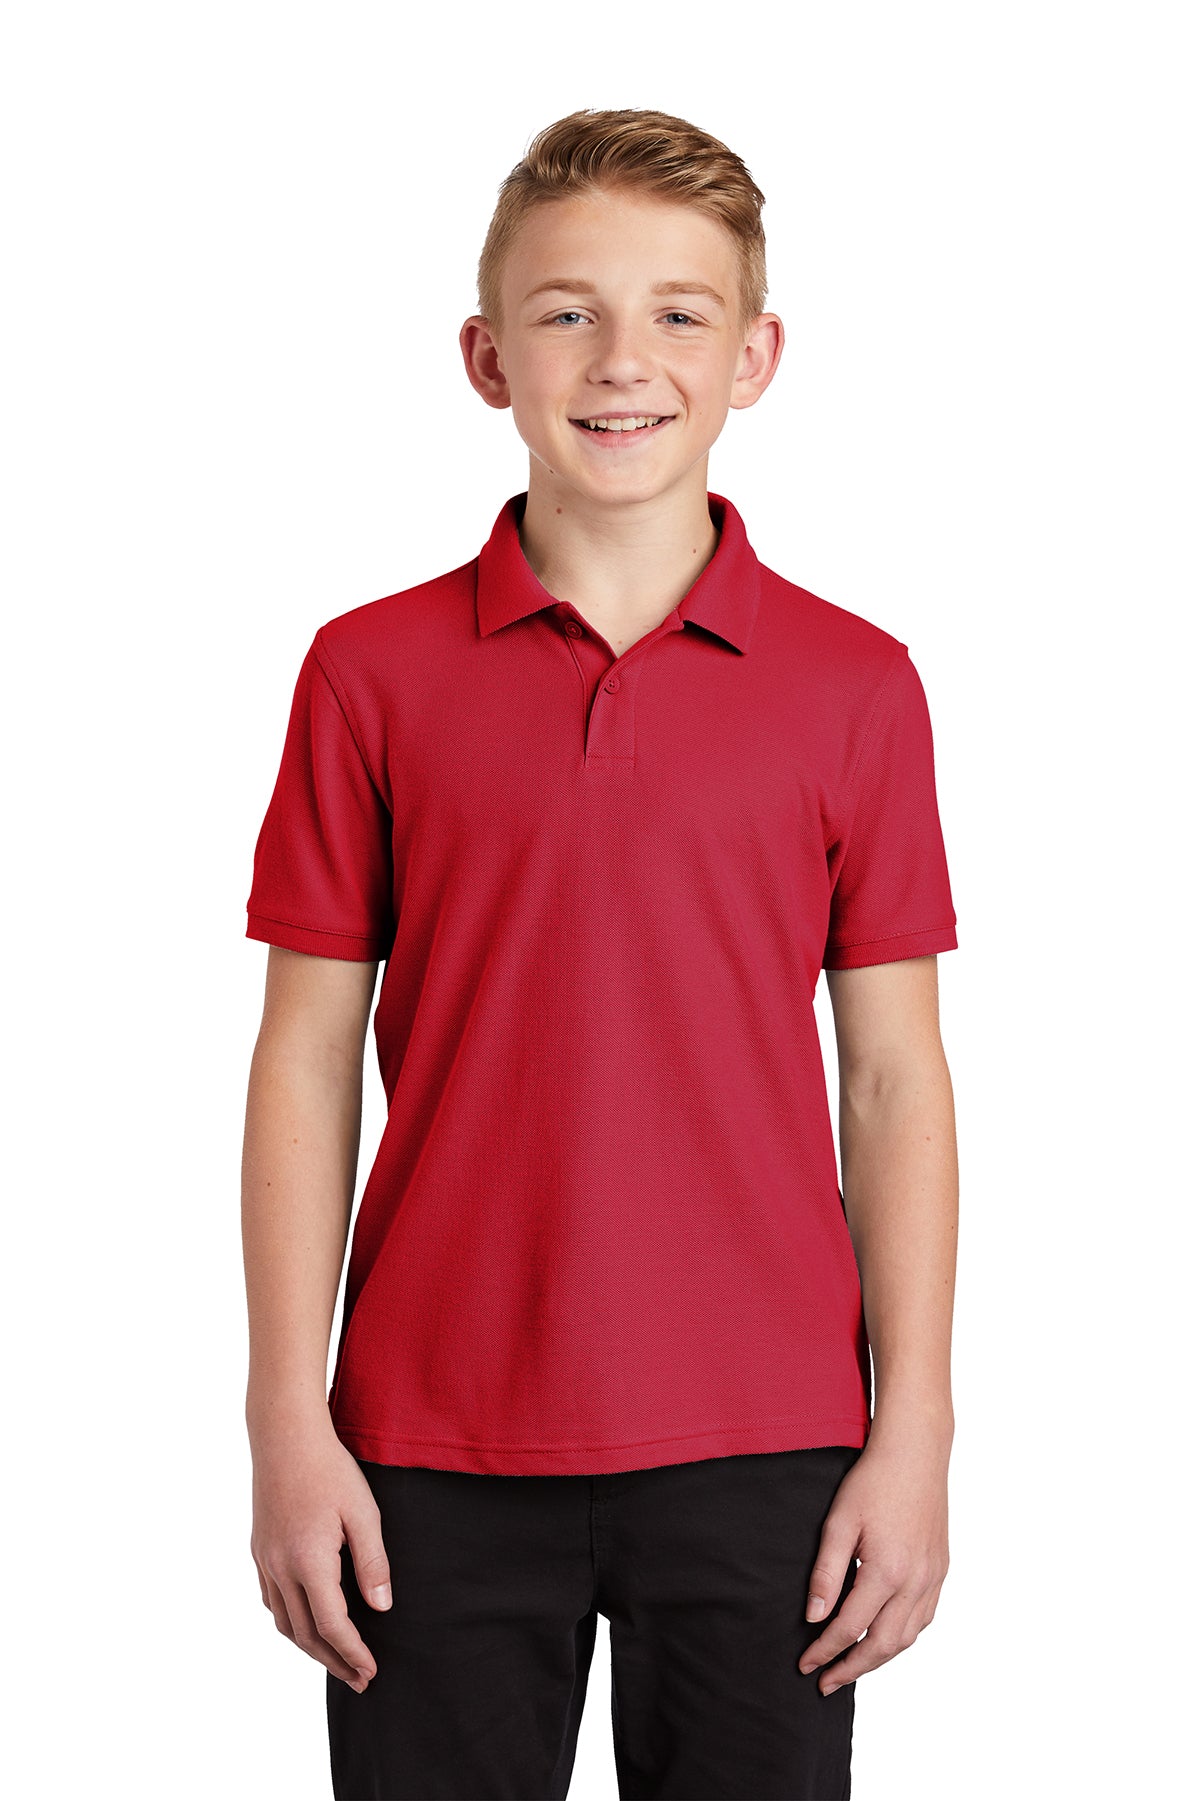 youth core classic pique polo rich red